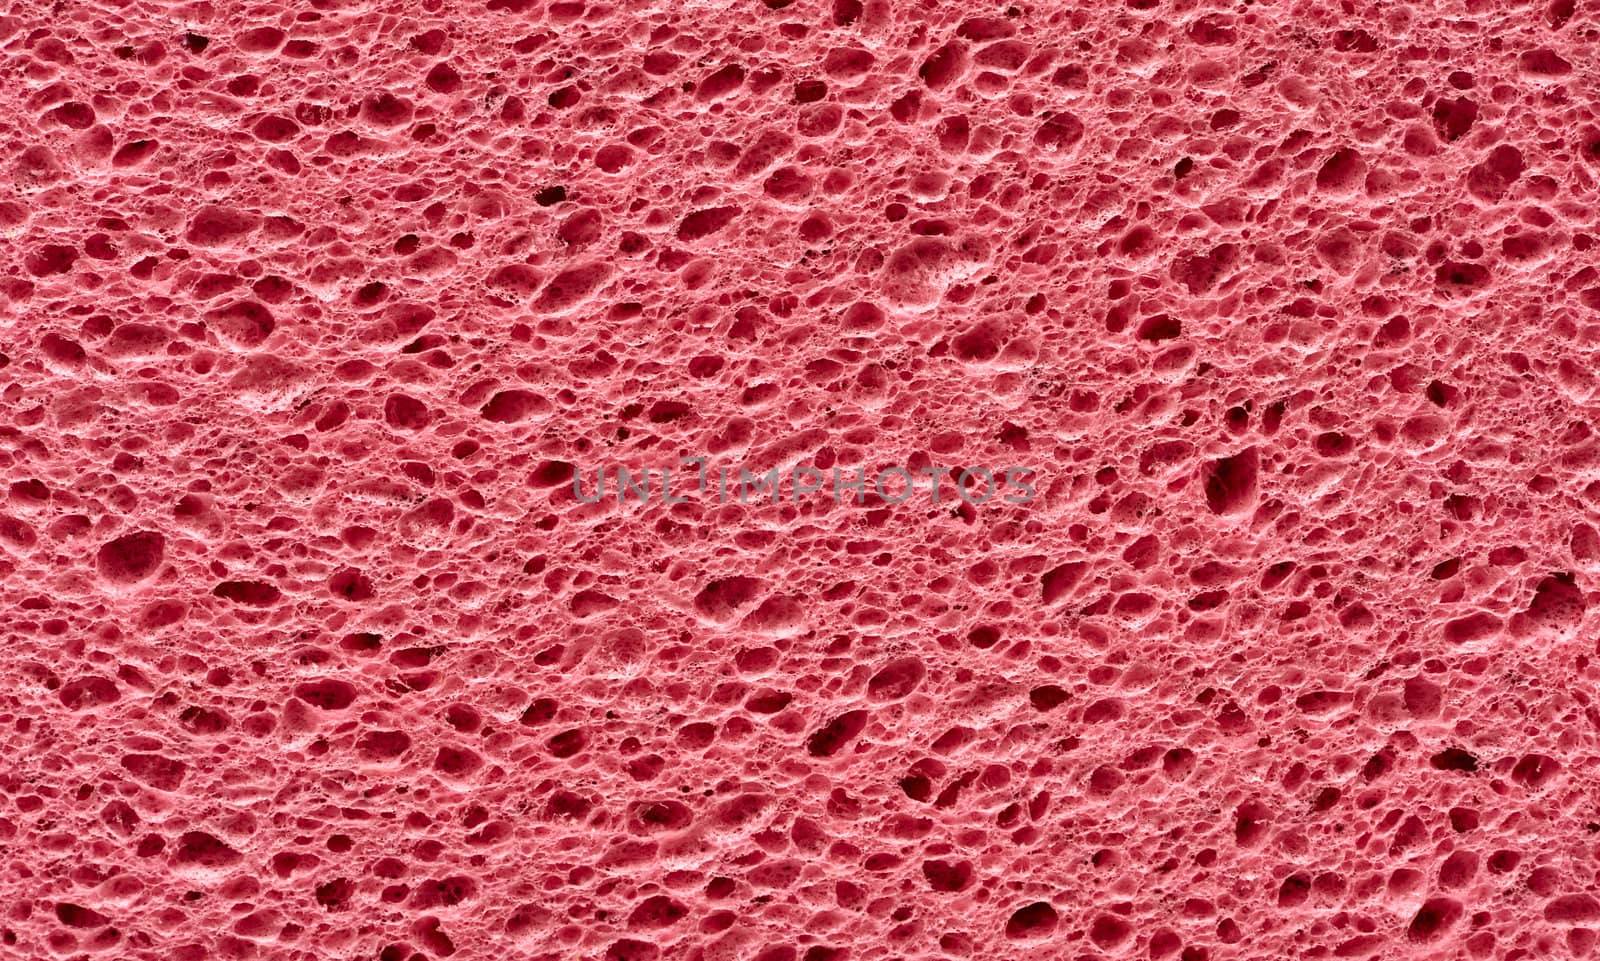 pink sponge with porous texture background